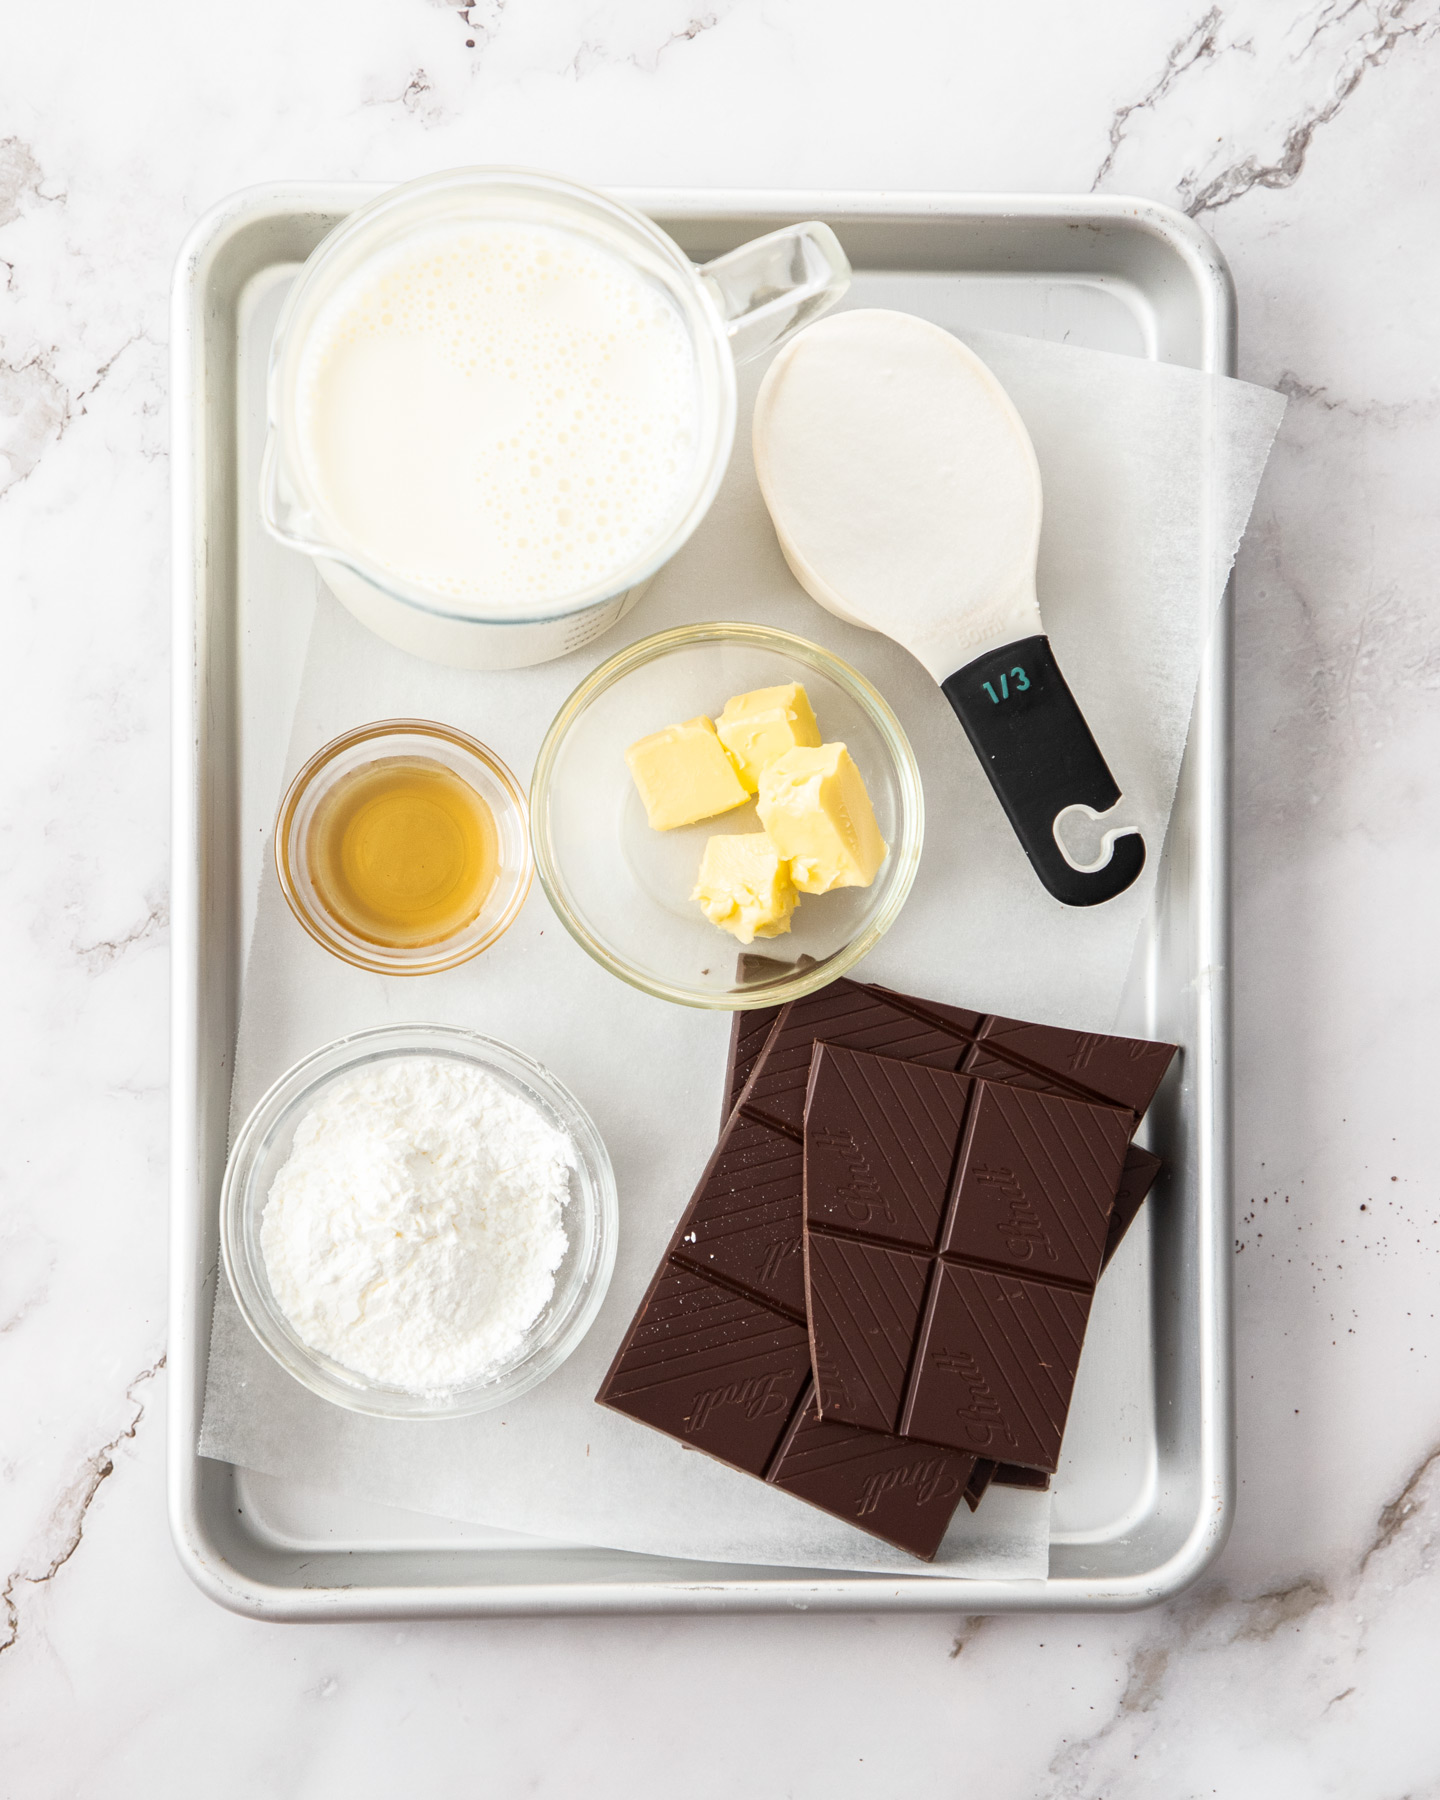 Ingredients for chocolate pots on a baking tray.